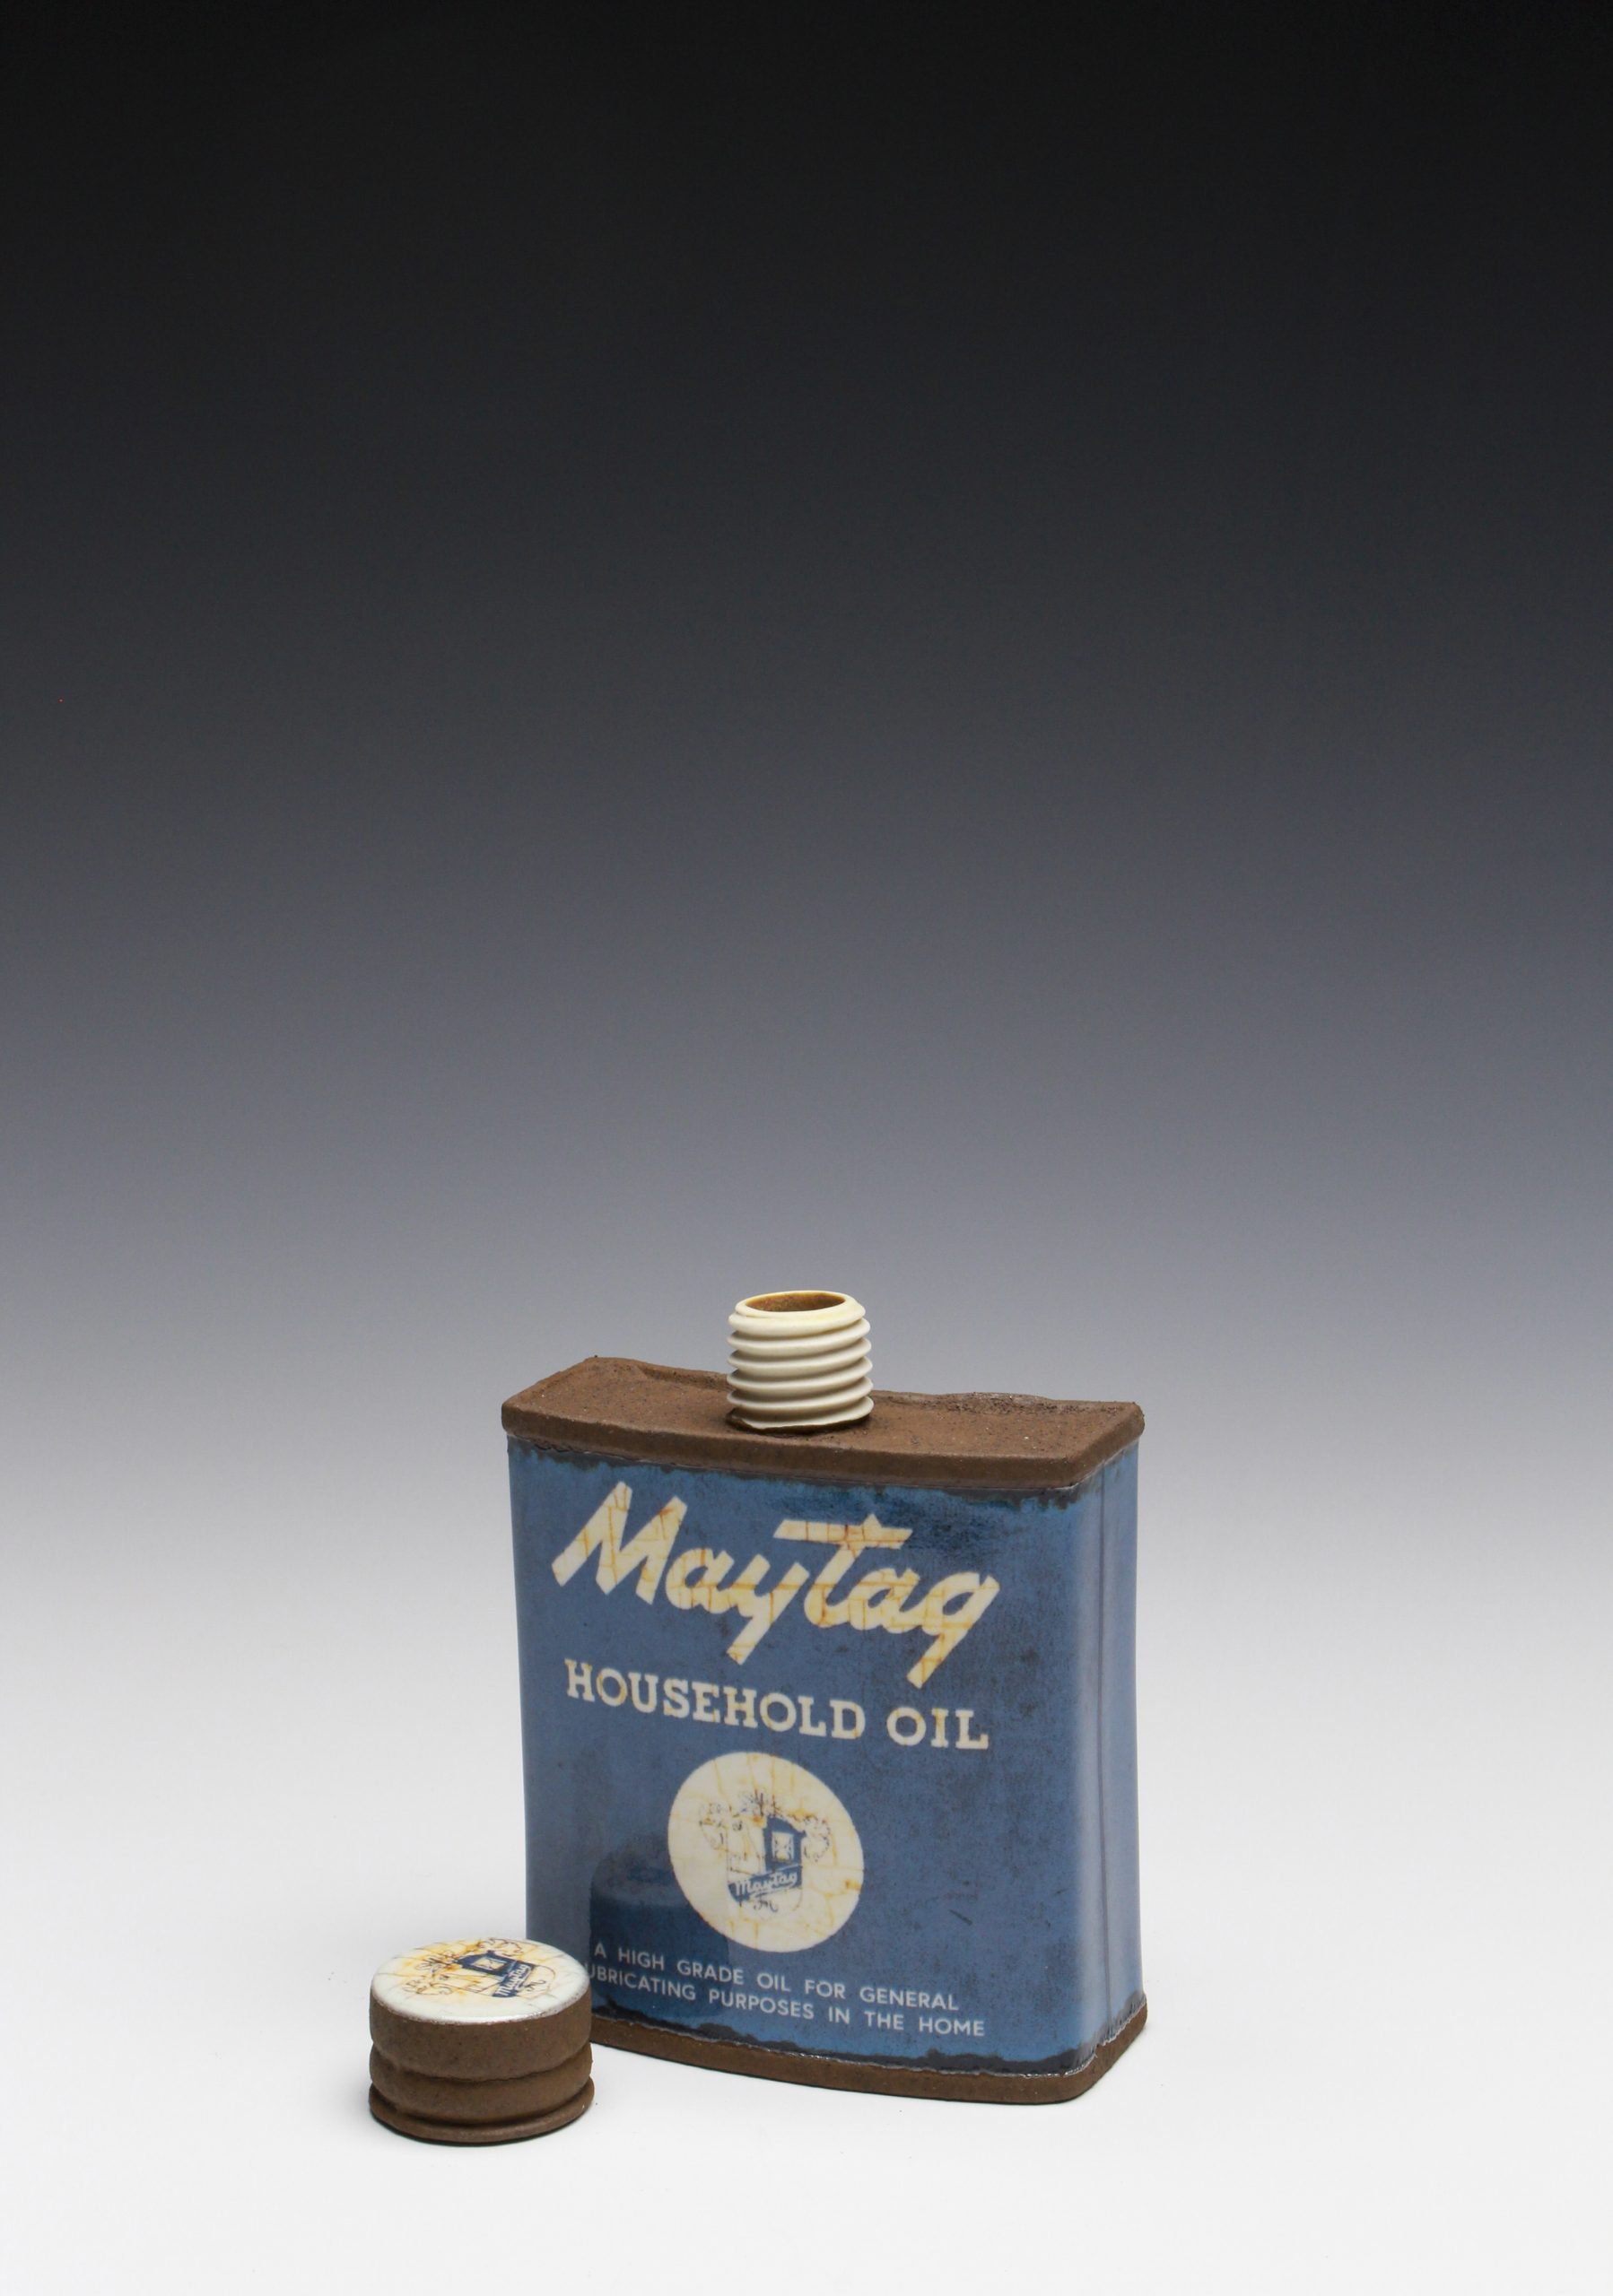 Mitchell Spain, "Maytag" Flask, 2017, porcelain and silicone, 3.75x3x1.25 inches, collection of the artist